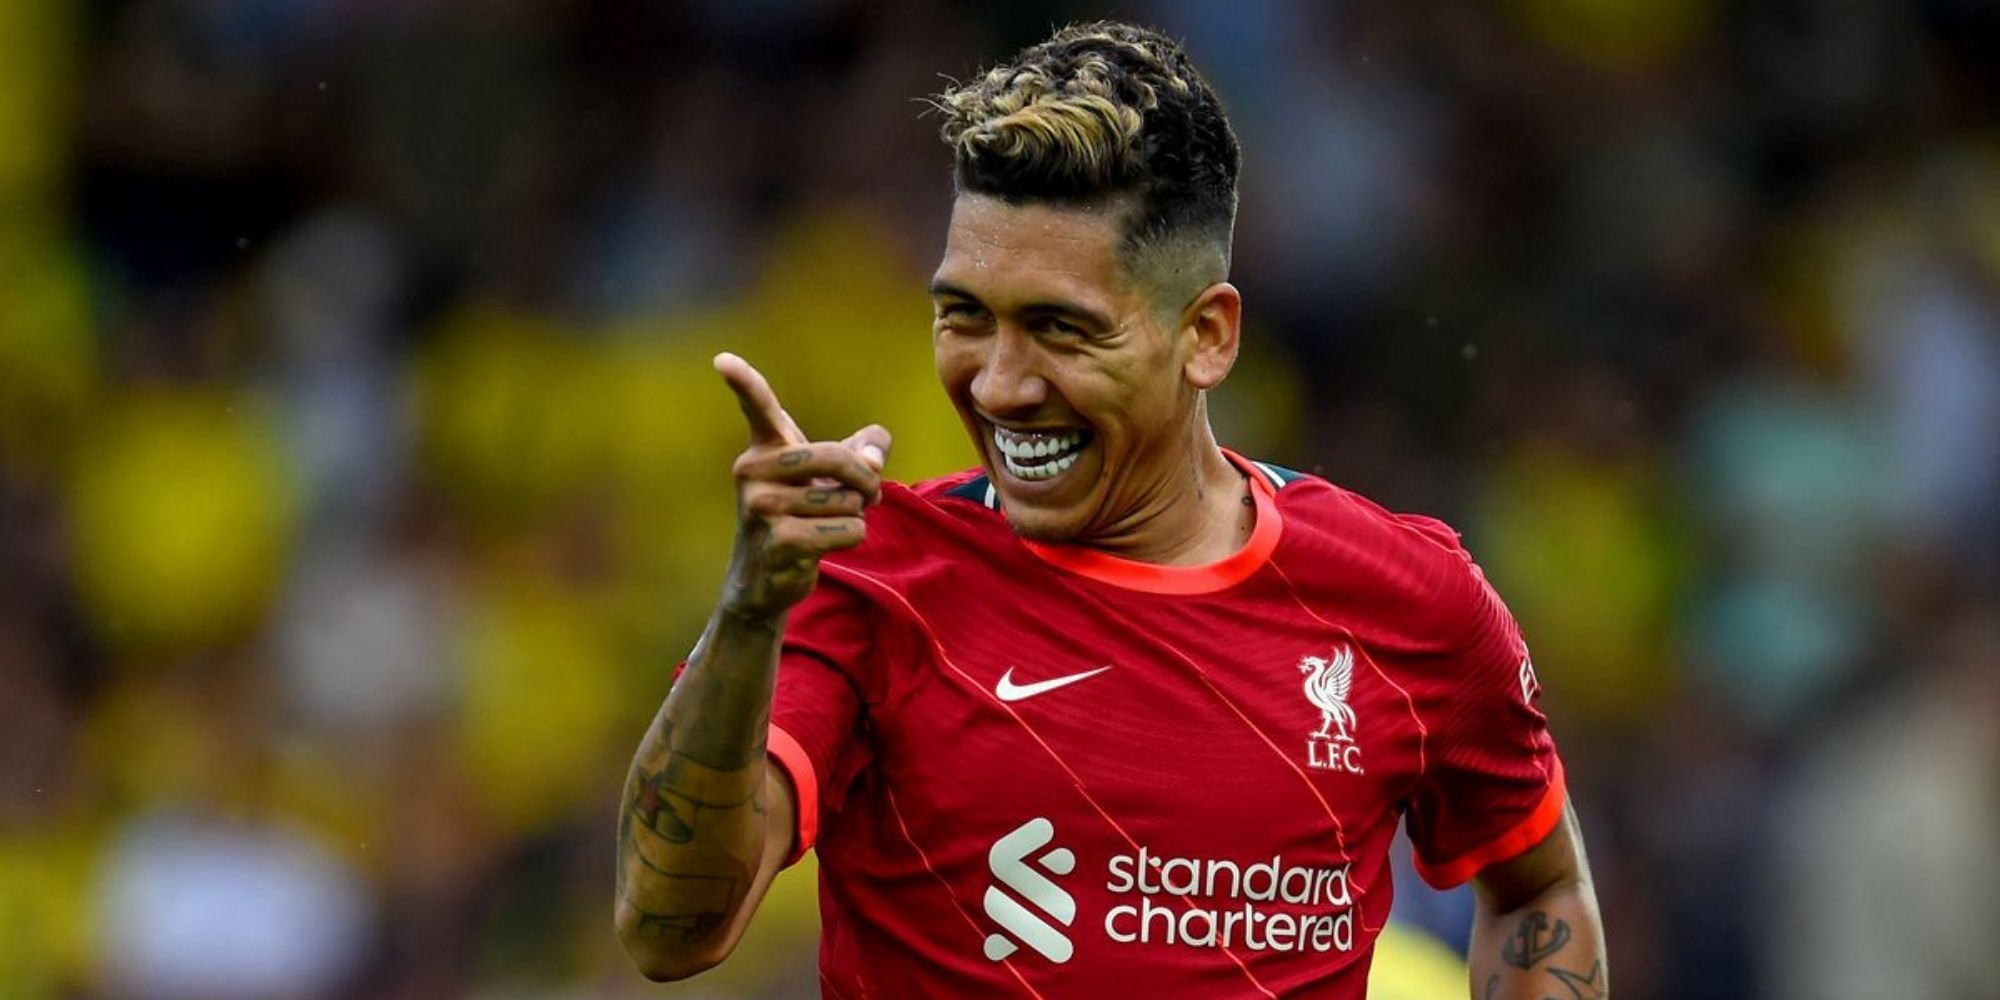 Official image of Roberto Firmino, a professional footballer.